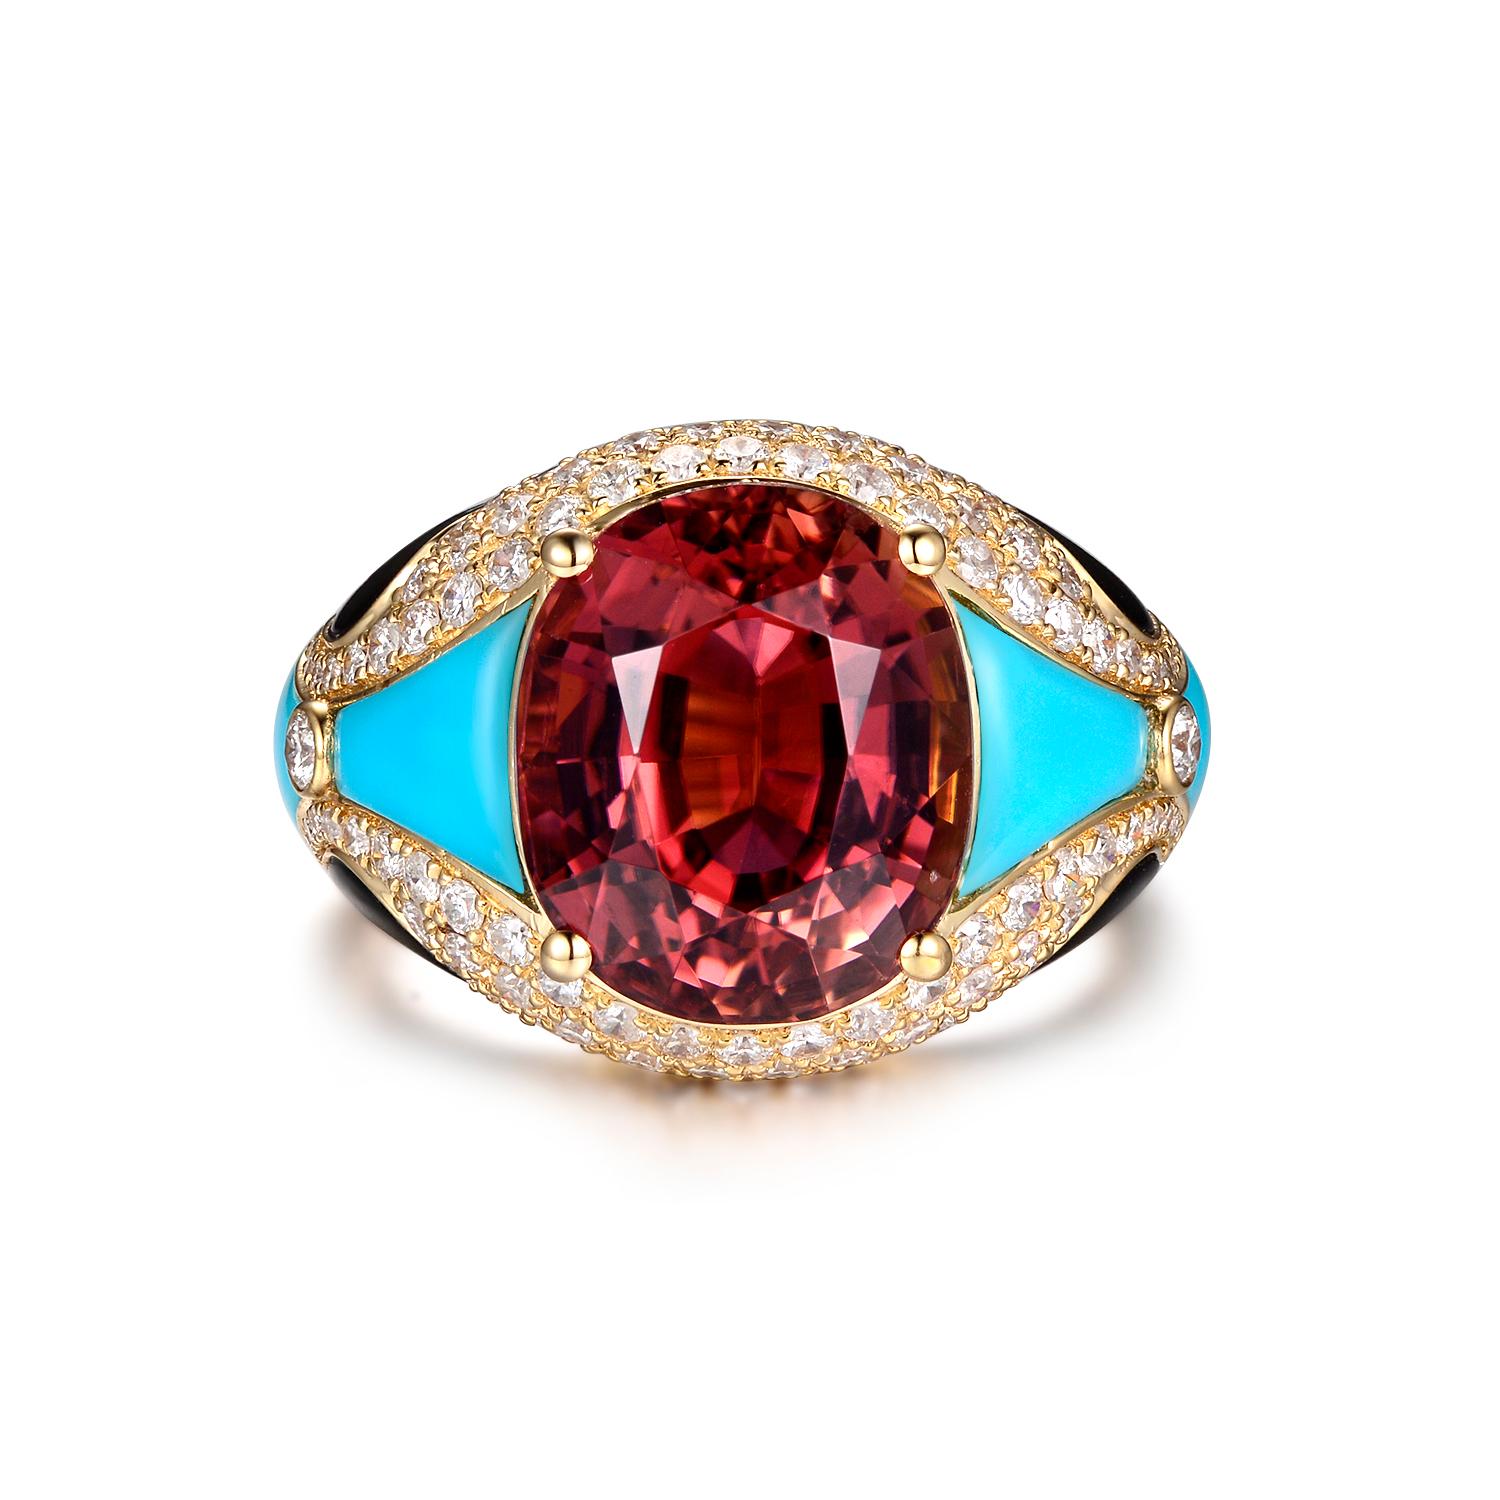 This ring features a 7.04 carats of pink tourmaline, it demonstrate a slight purple hue in the stone. Assented with 0.95 carats of diamonds. Turquoise and Onyx are handcrafted in geometrical shape and hand set into the 18 karat yellow gold